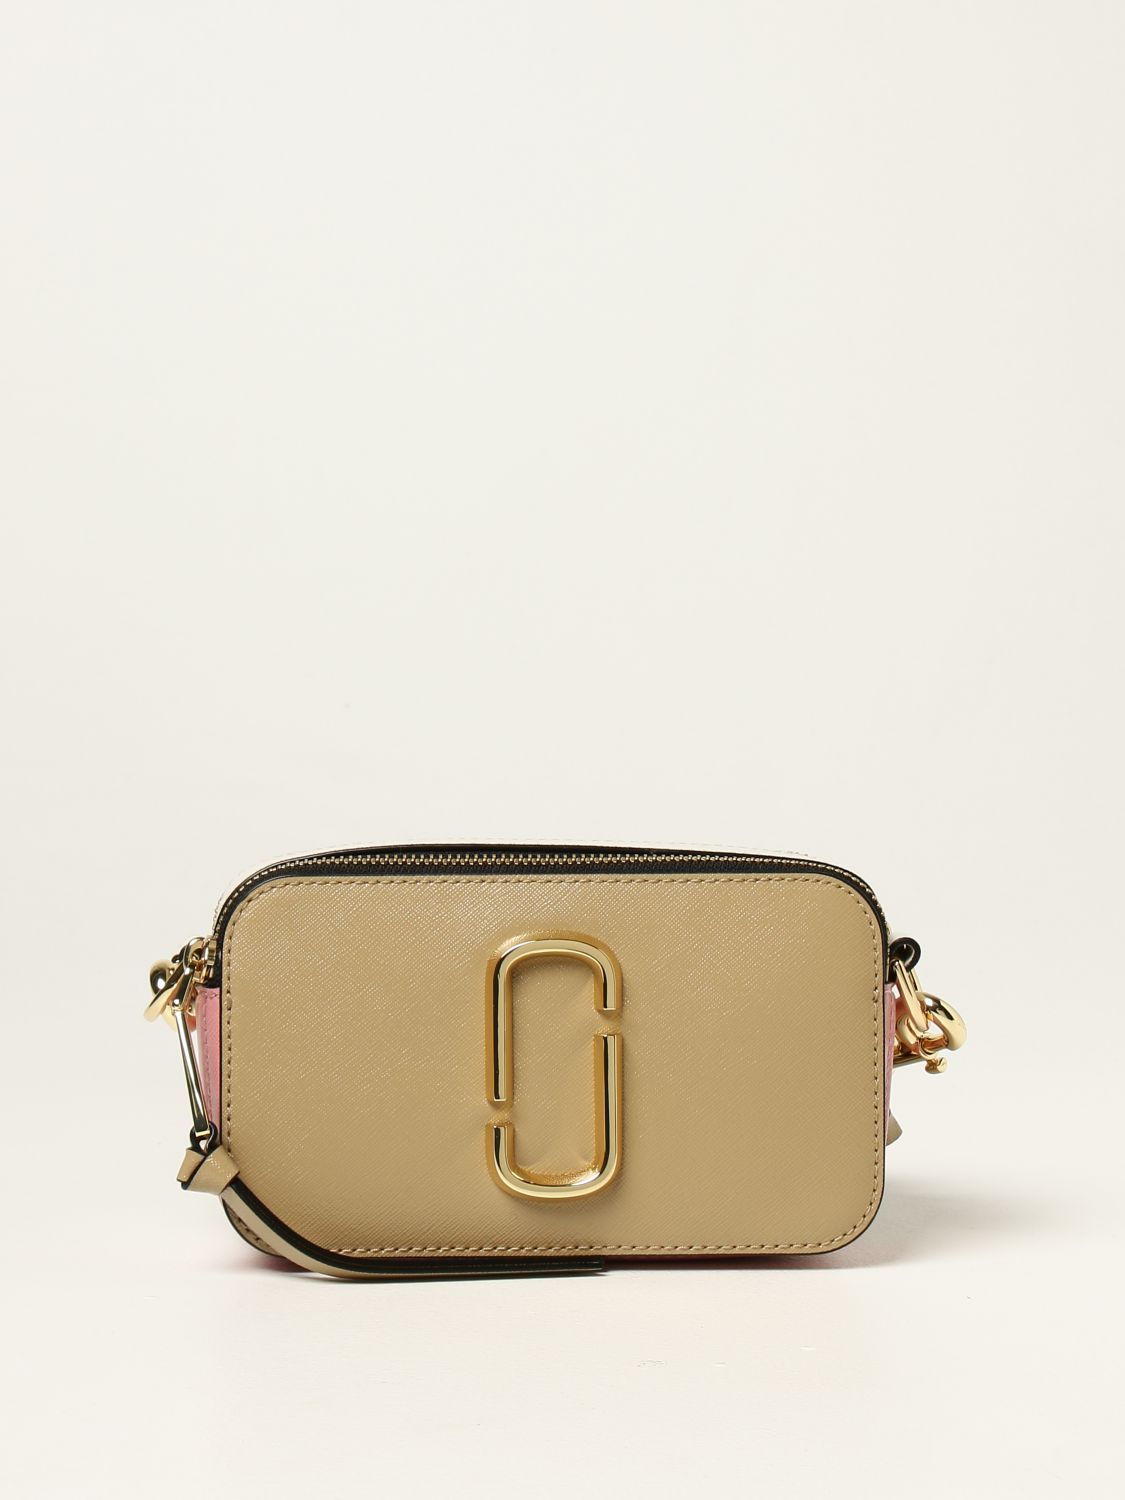 MARC JACOBS: The Snapshot bag in tricolor saffiano leather | Crossbody Bags Marc Jacobs Women Beige | Crossbody Bags Marc M0012007 GIGLIO.COM